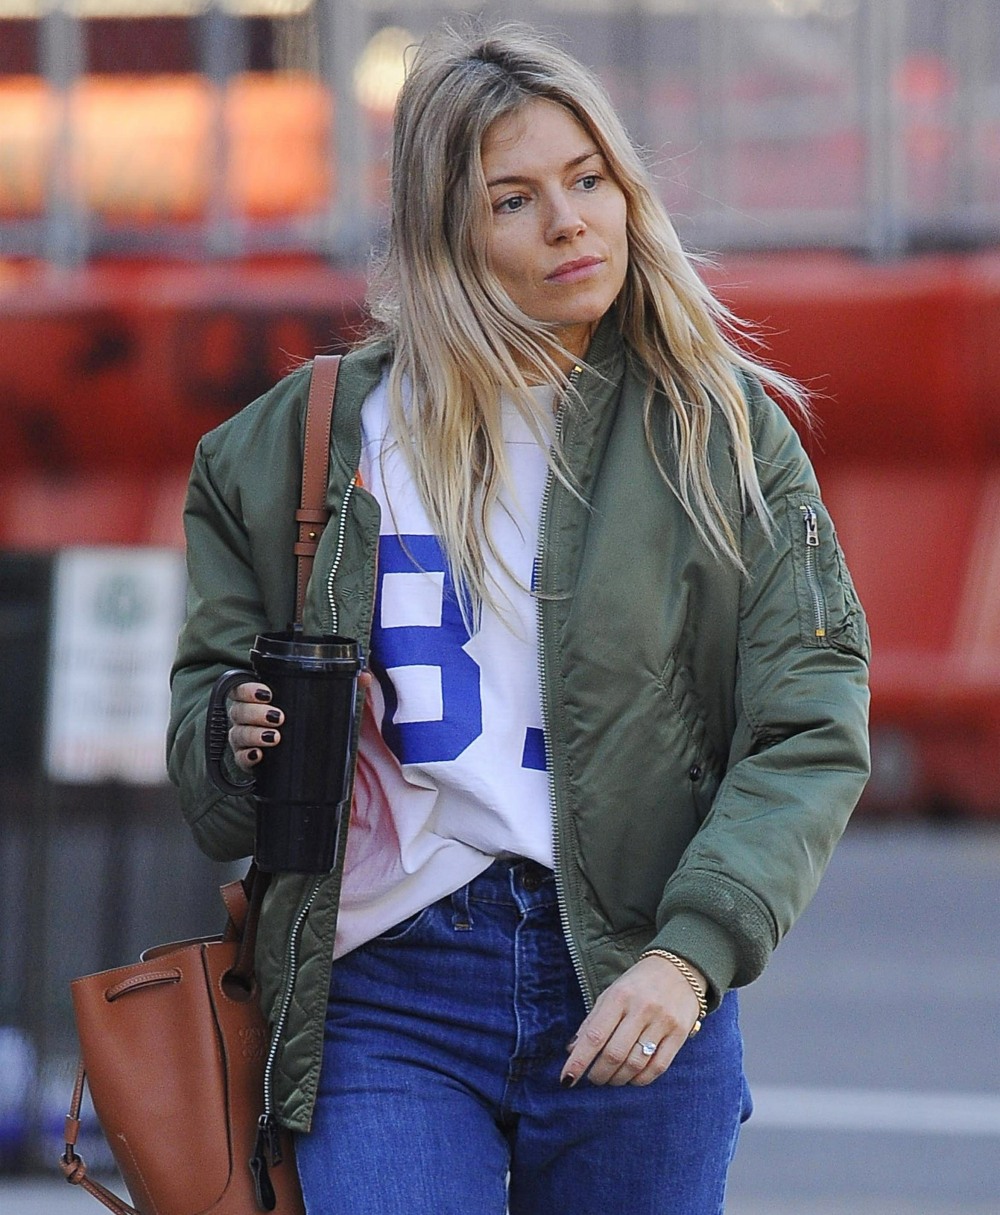 Sienna Miller shows off her rumored engagement ring as she hails a cab